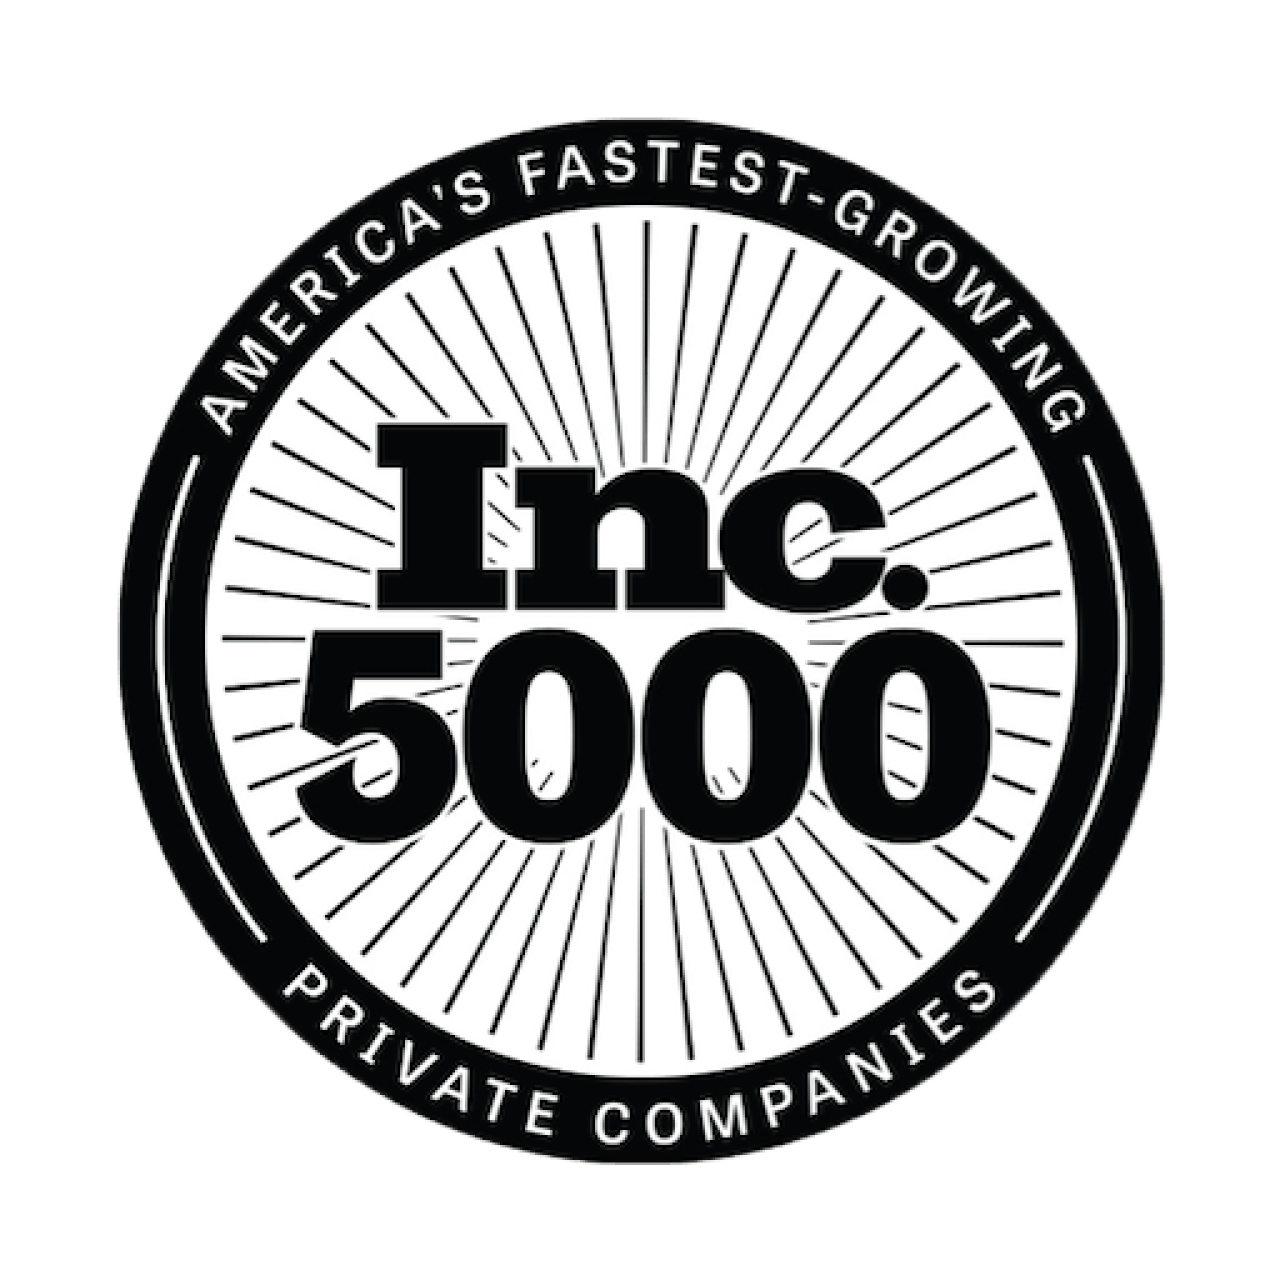 inc 5000 fastest growing private companies winner db services.